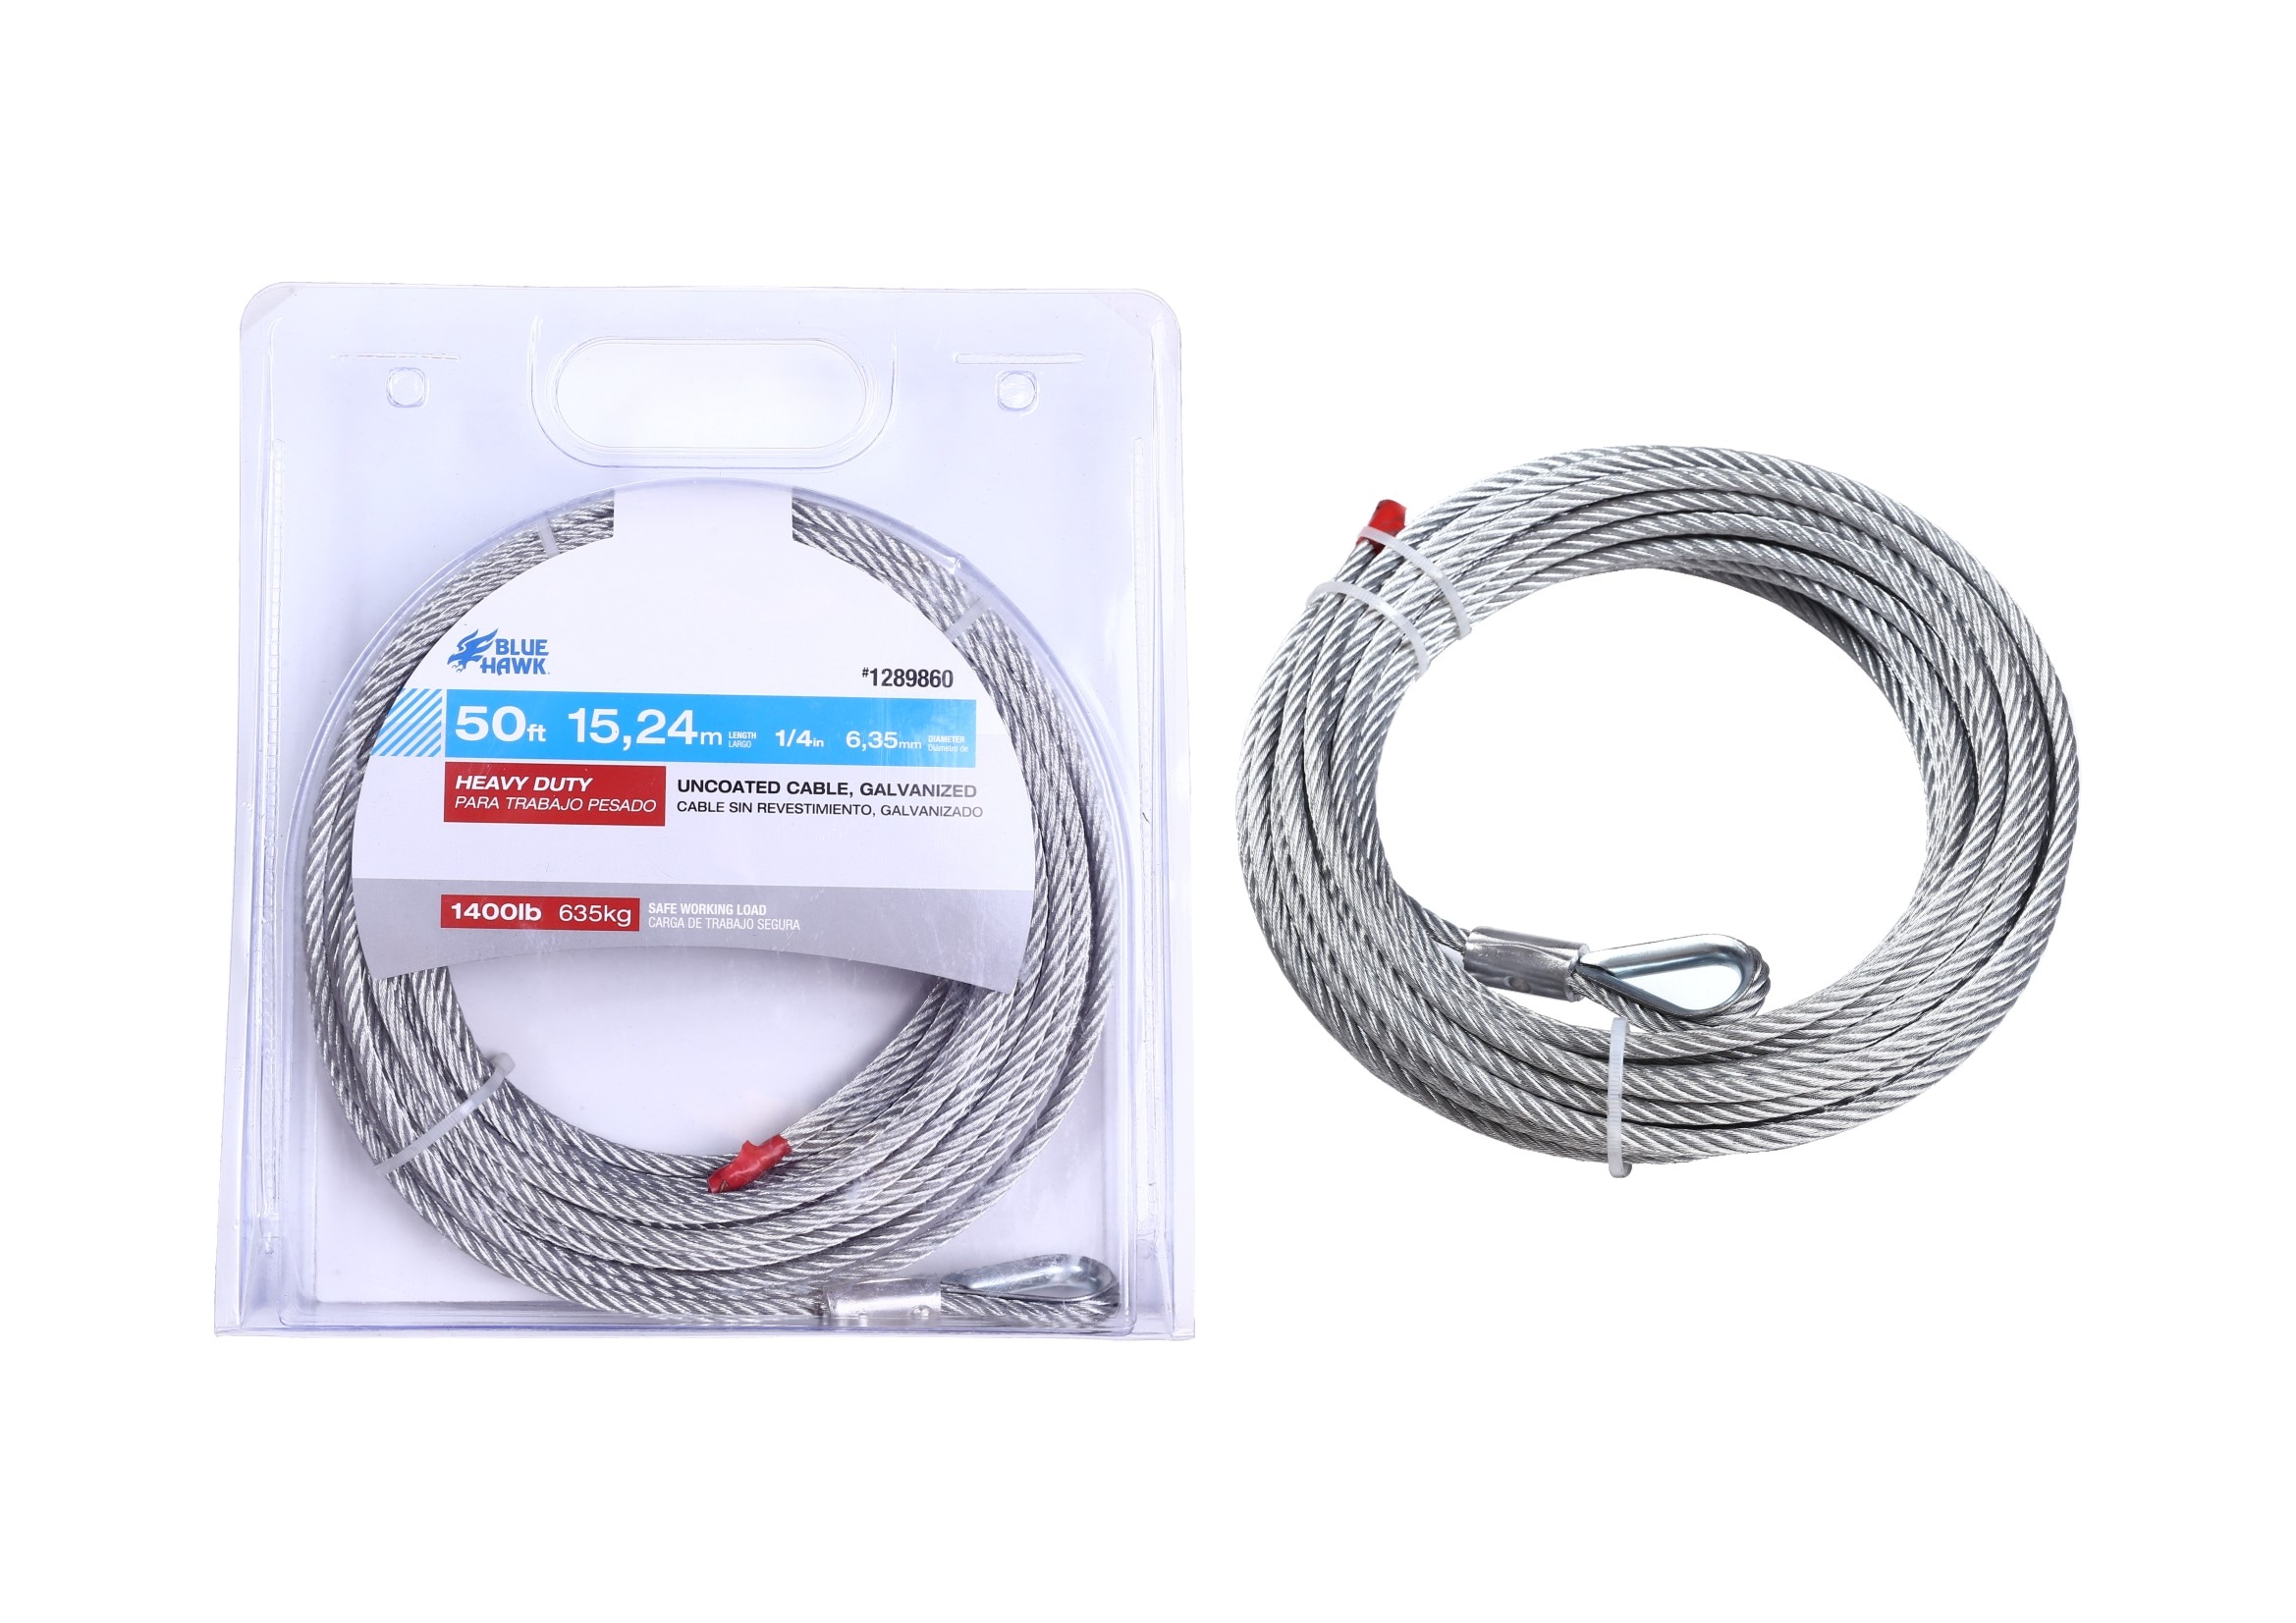 5/16 in. x 20 ft. Galvanized Uncoated Steel Wire Rope with Grab